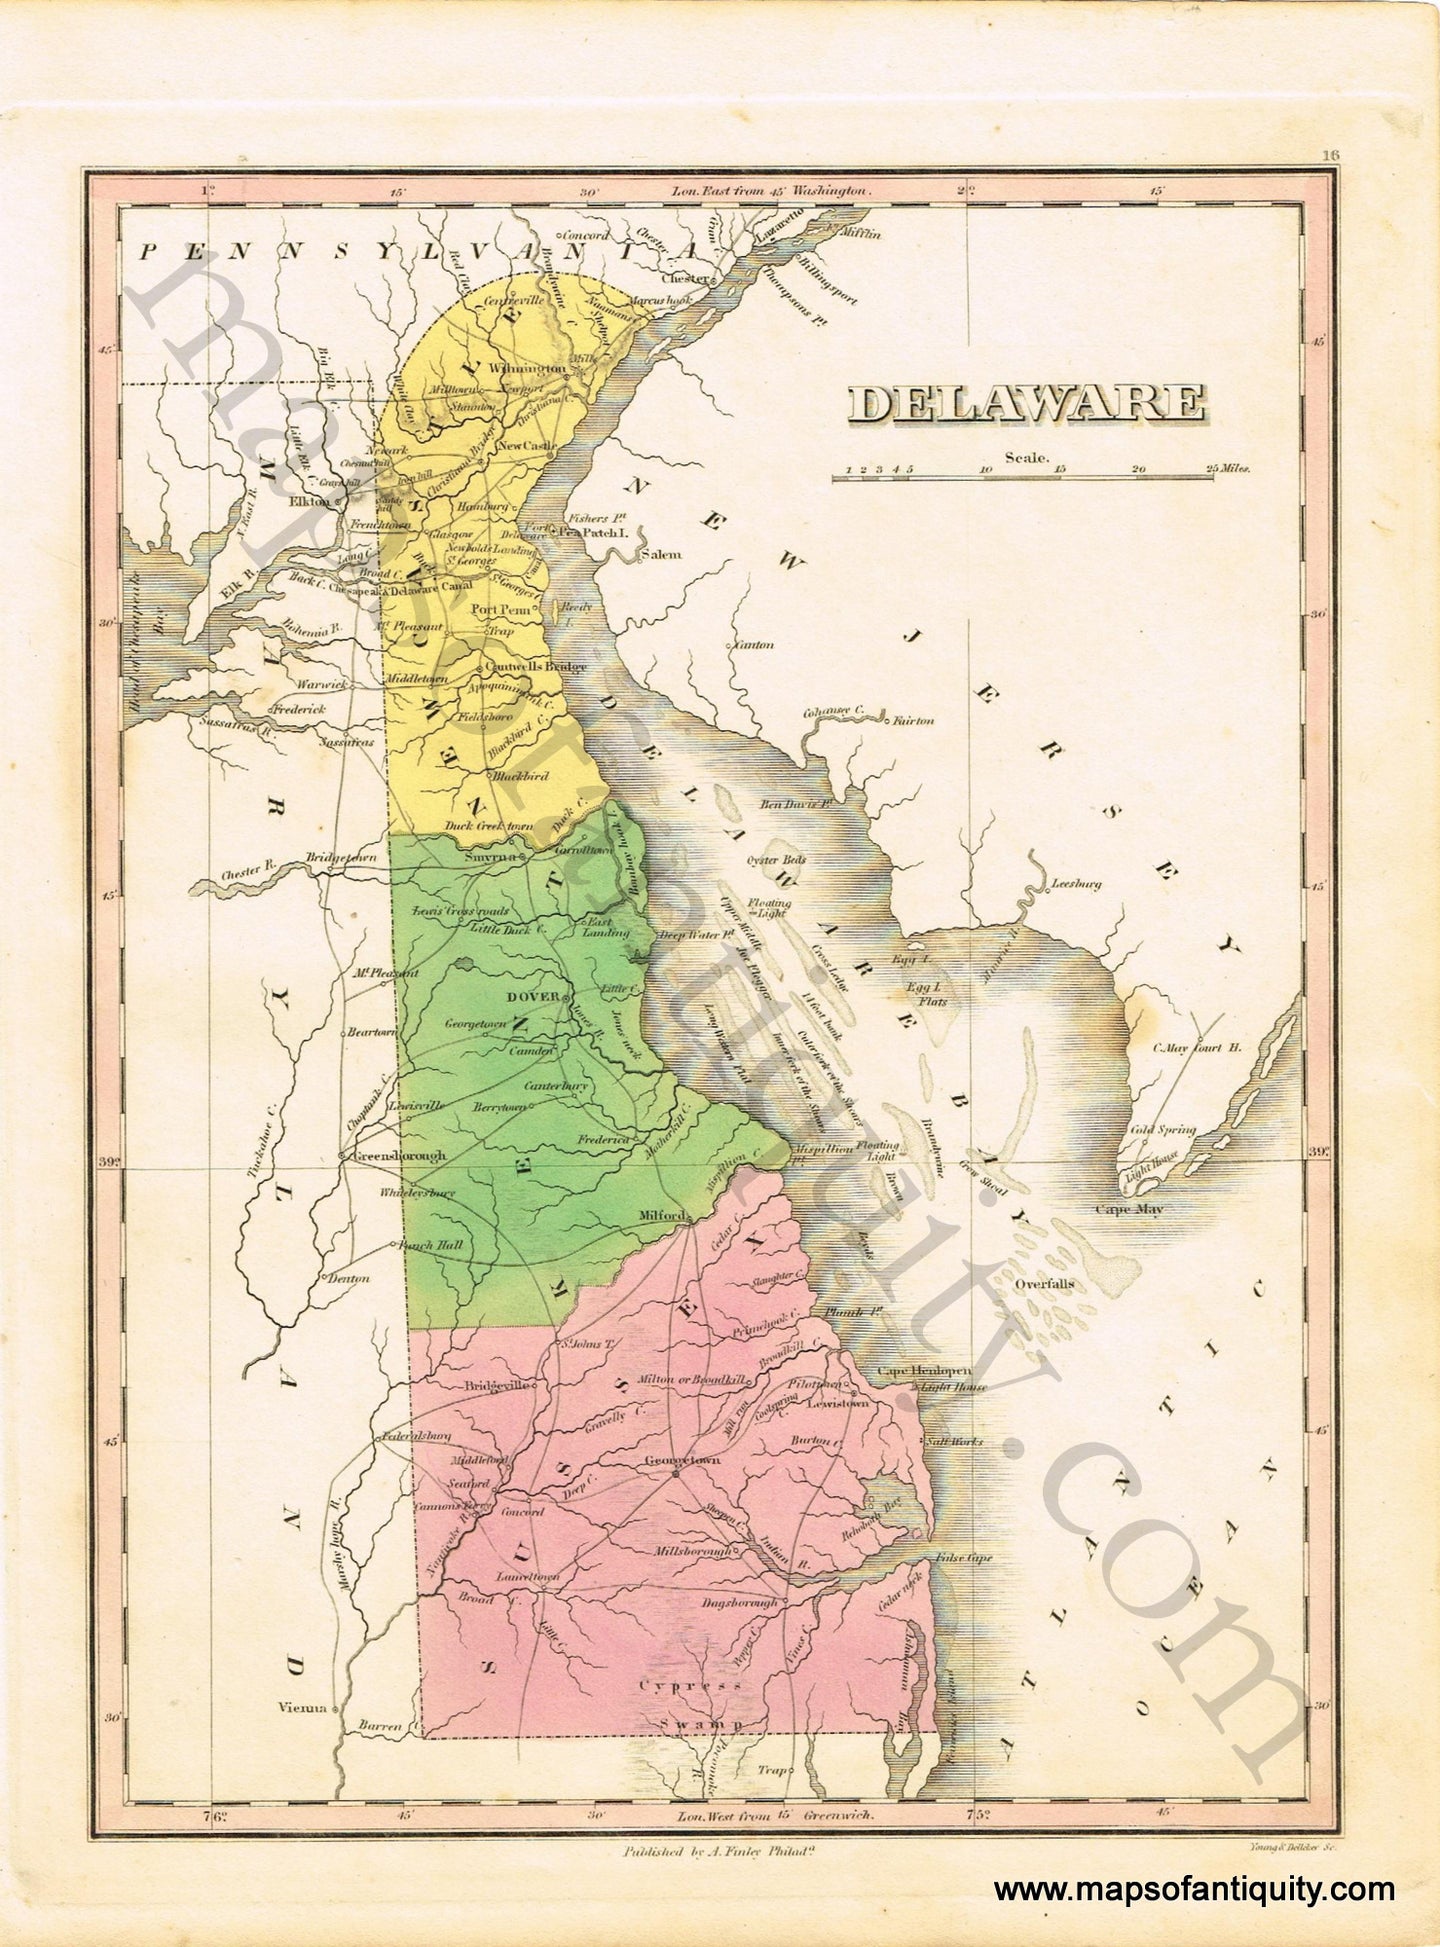 Antique-Hand-Colored-Map-Delaware-United-States-Mid-Atlantic-1827-Anthony-Finley-Maps-Of-Antiquity